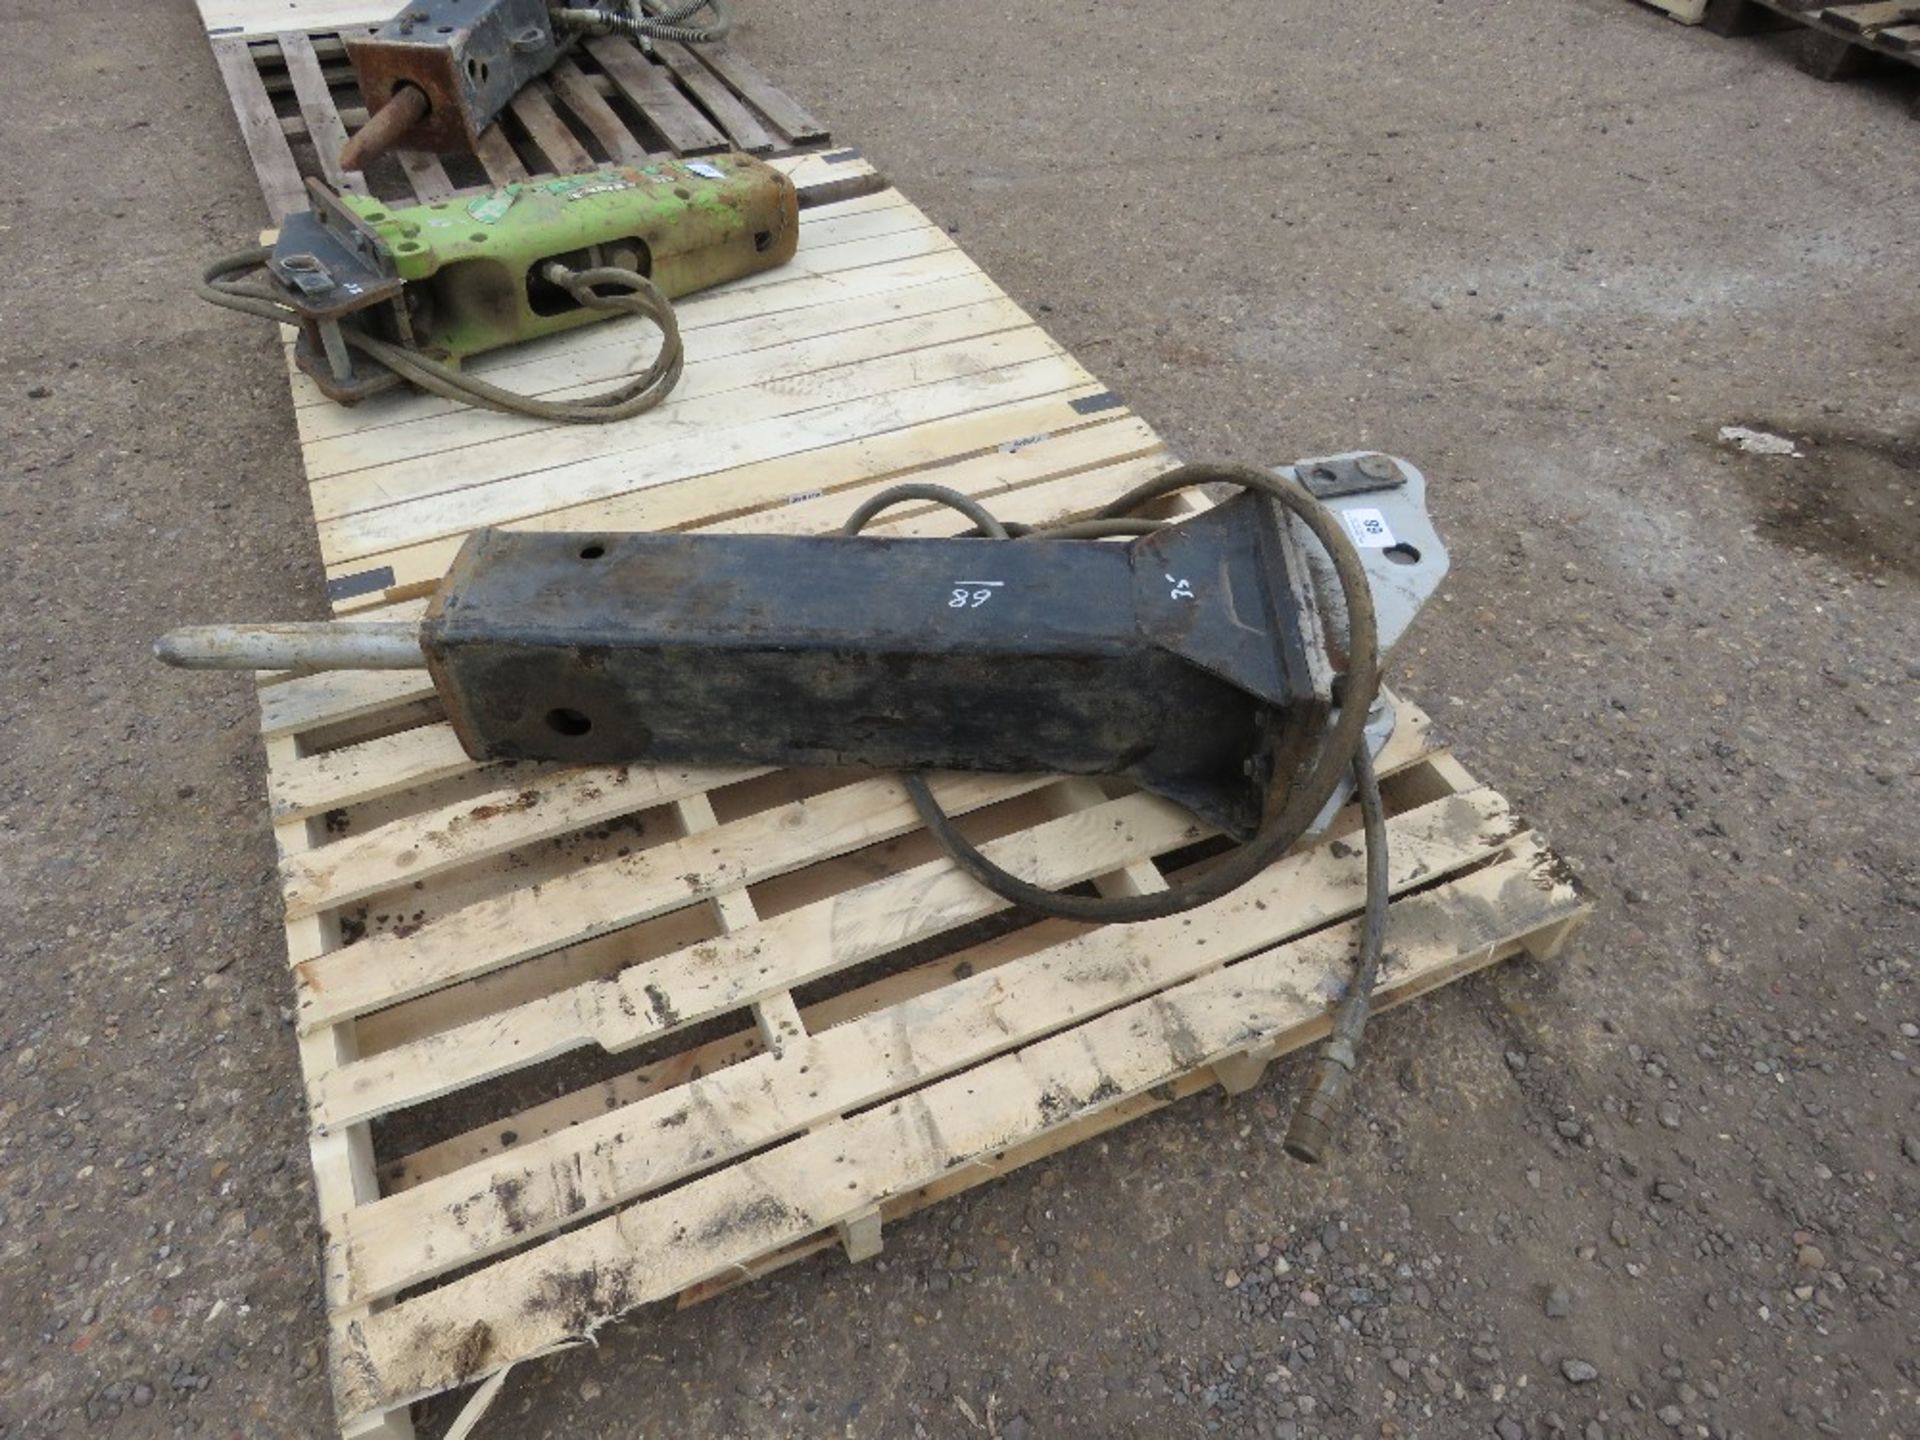 ATLAS COPCO TYPE EXCAVATOR MOUNTED BREAKER ON 35MM PINS. SOURCED FROM DEPOT CLOSURE. - Image 2 of 2